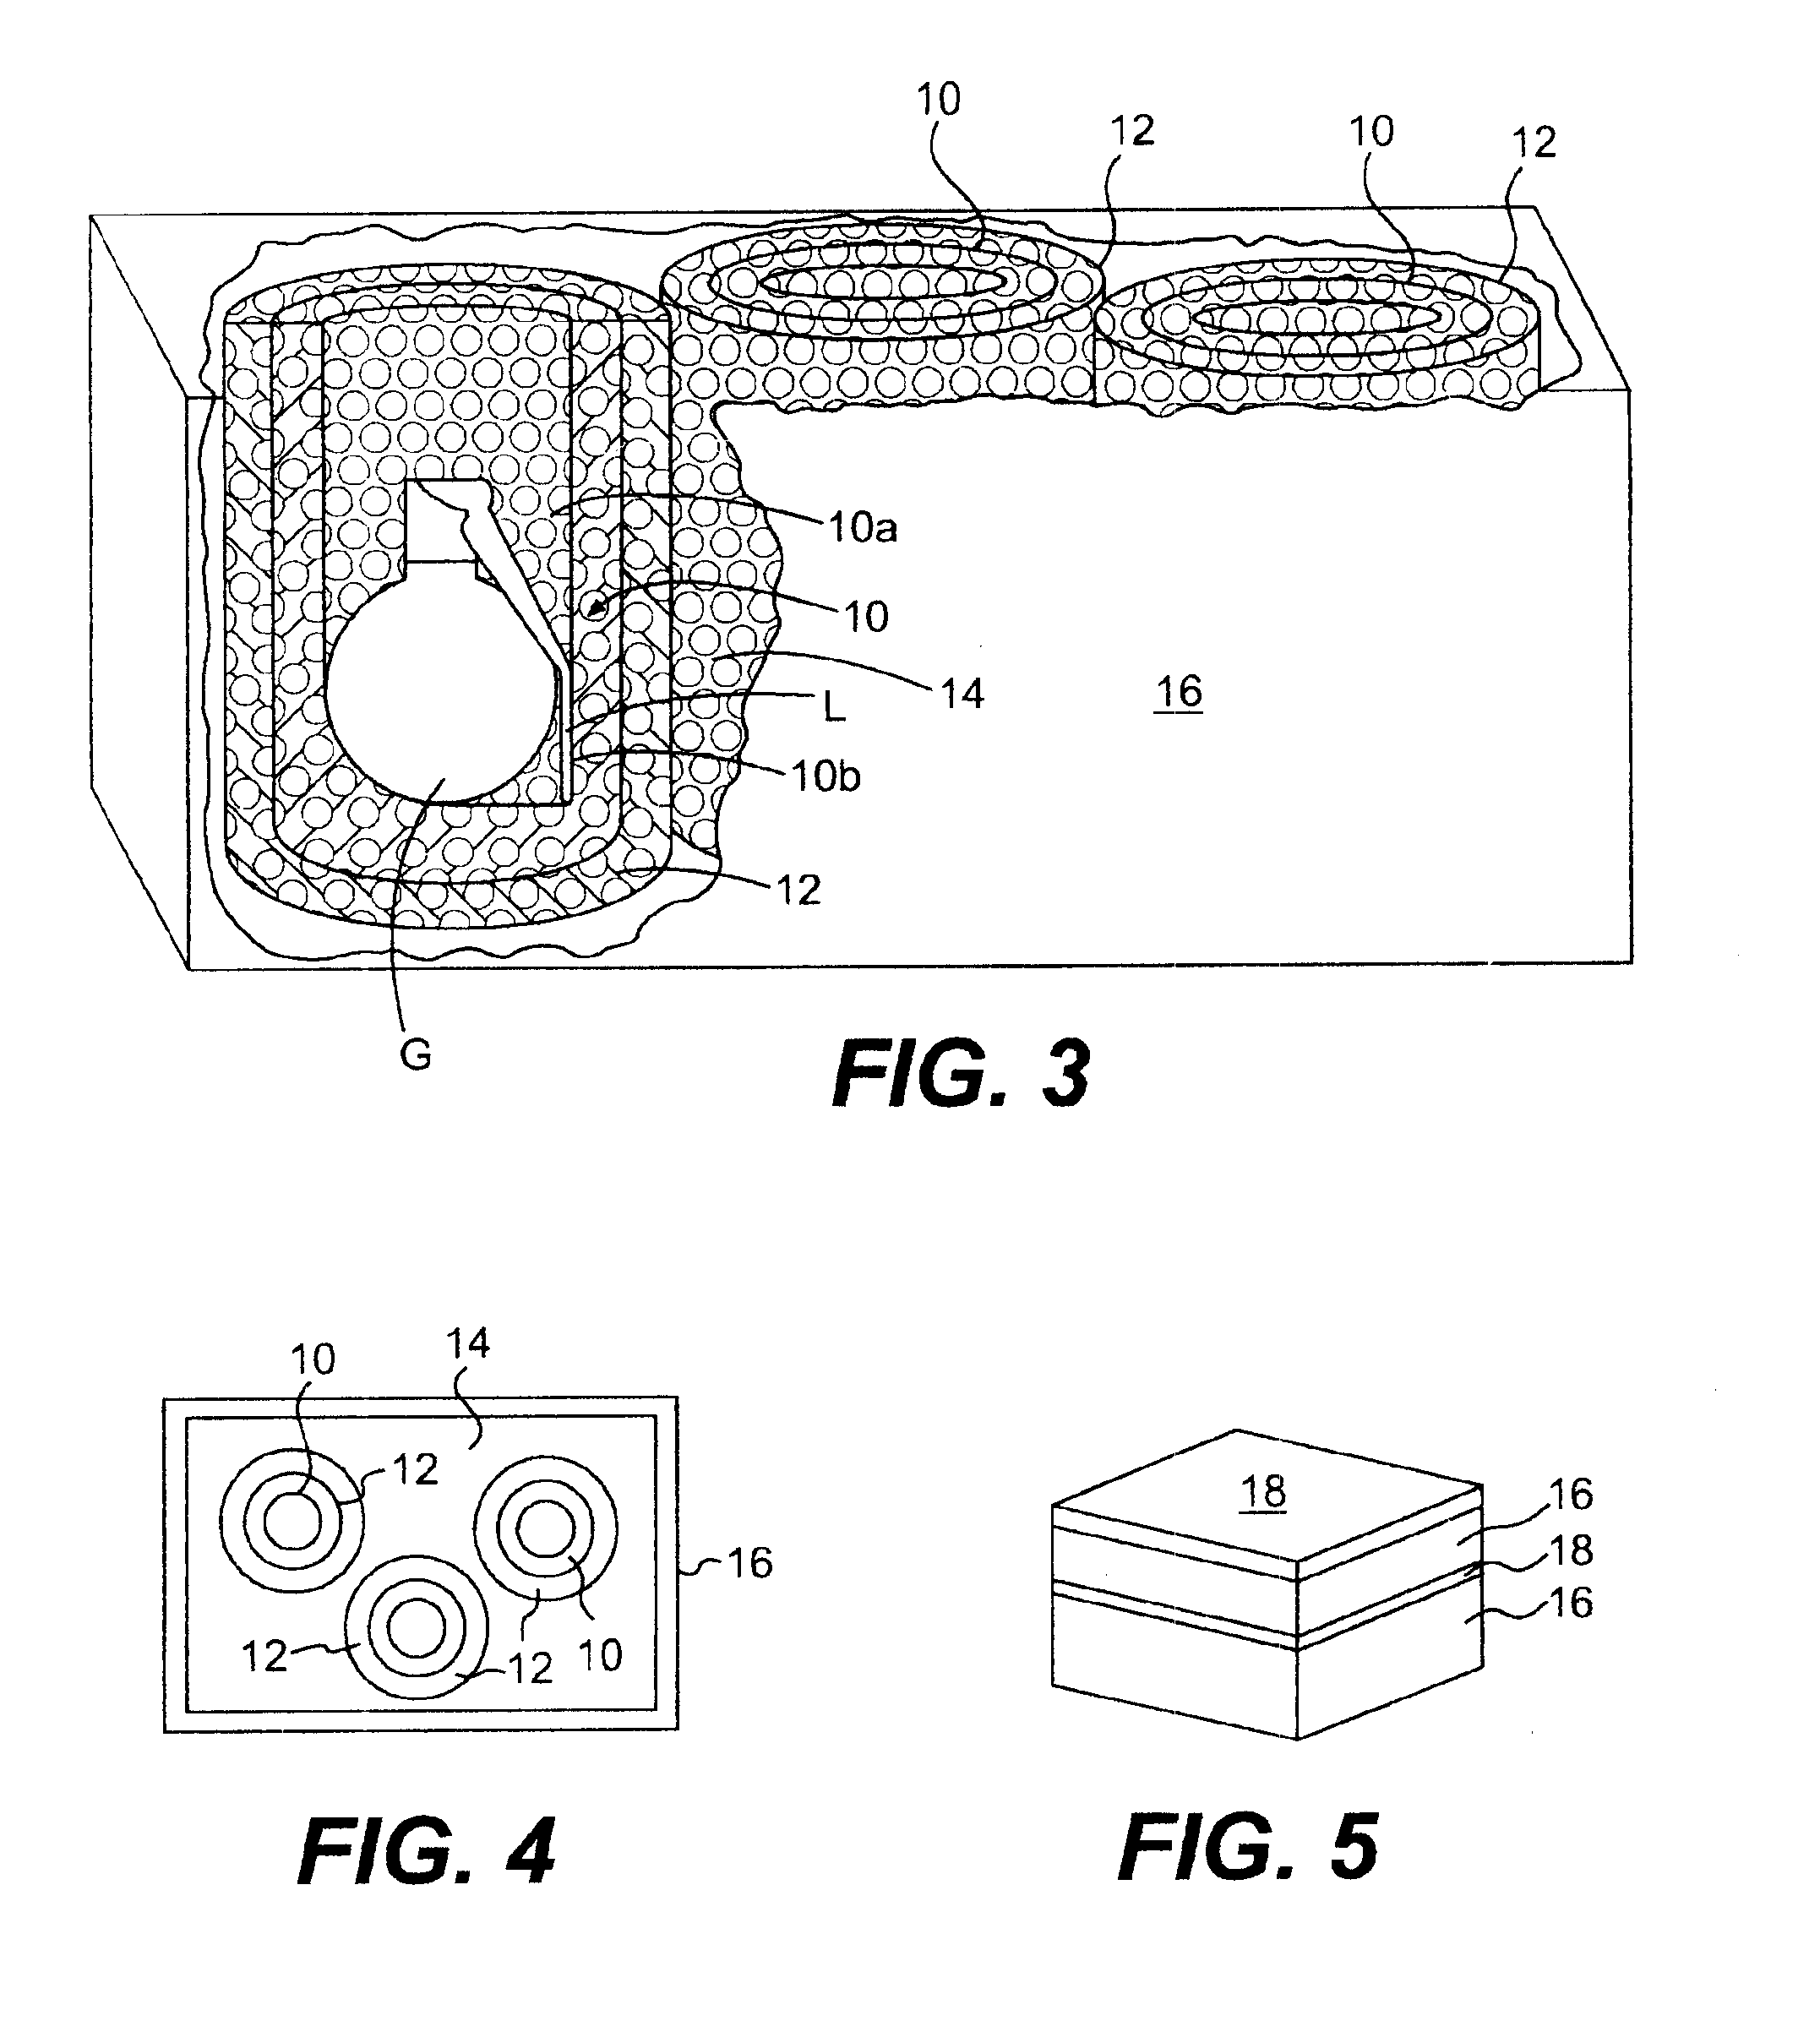 Protective packaging device for blast and fragmentation mitigation